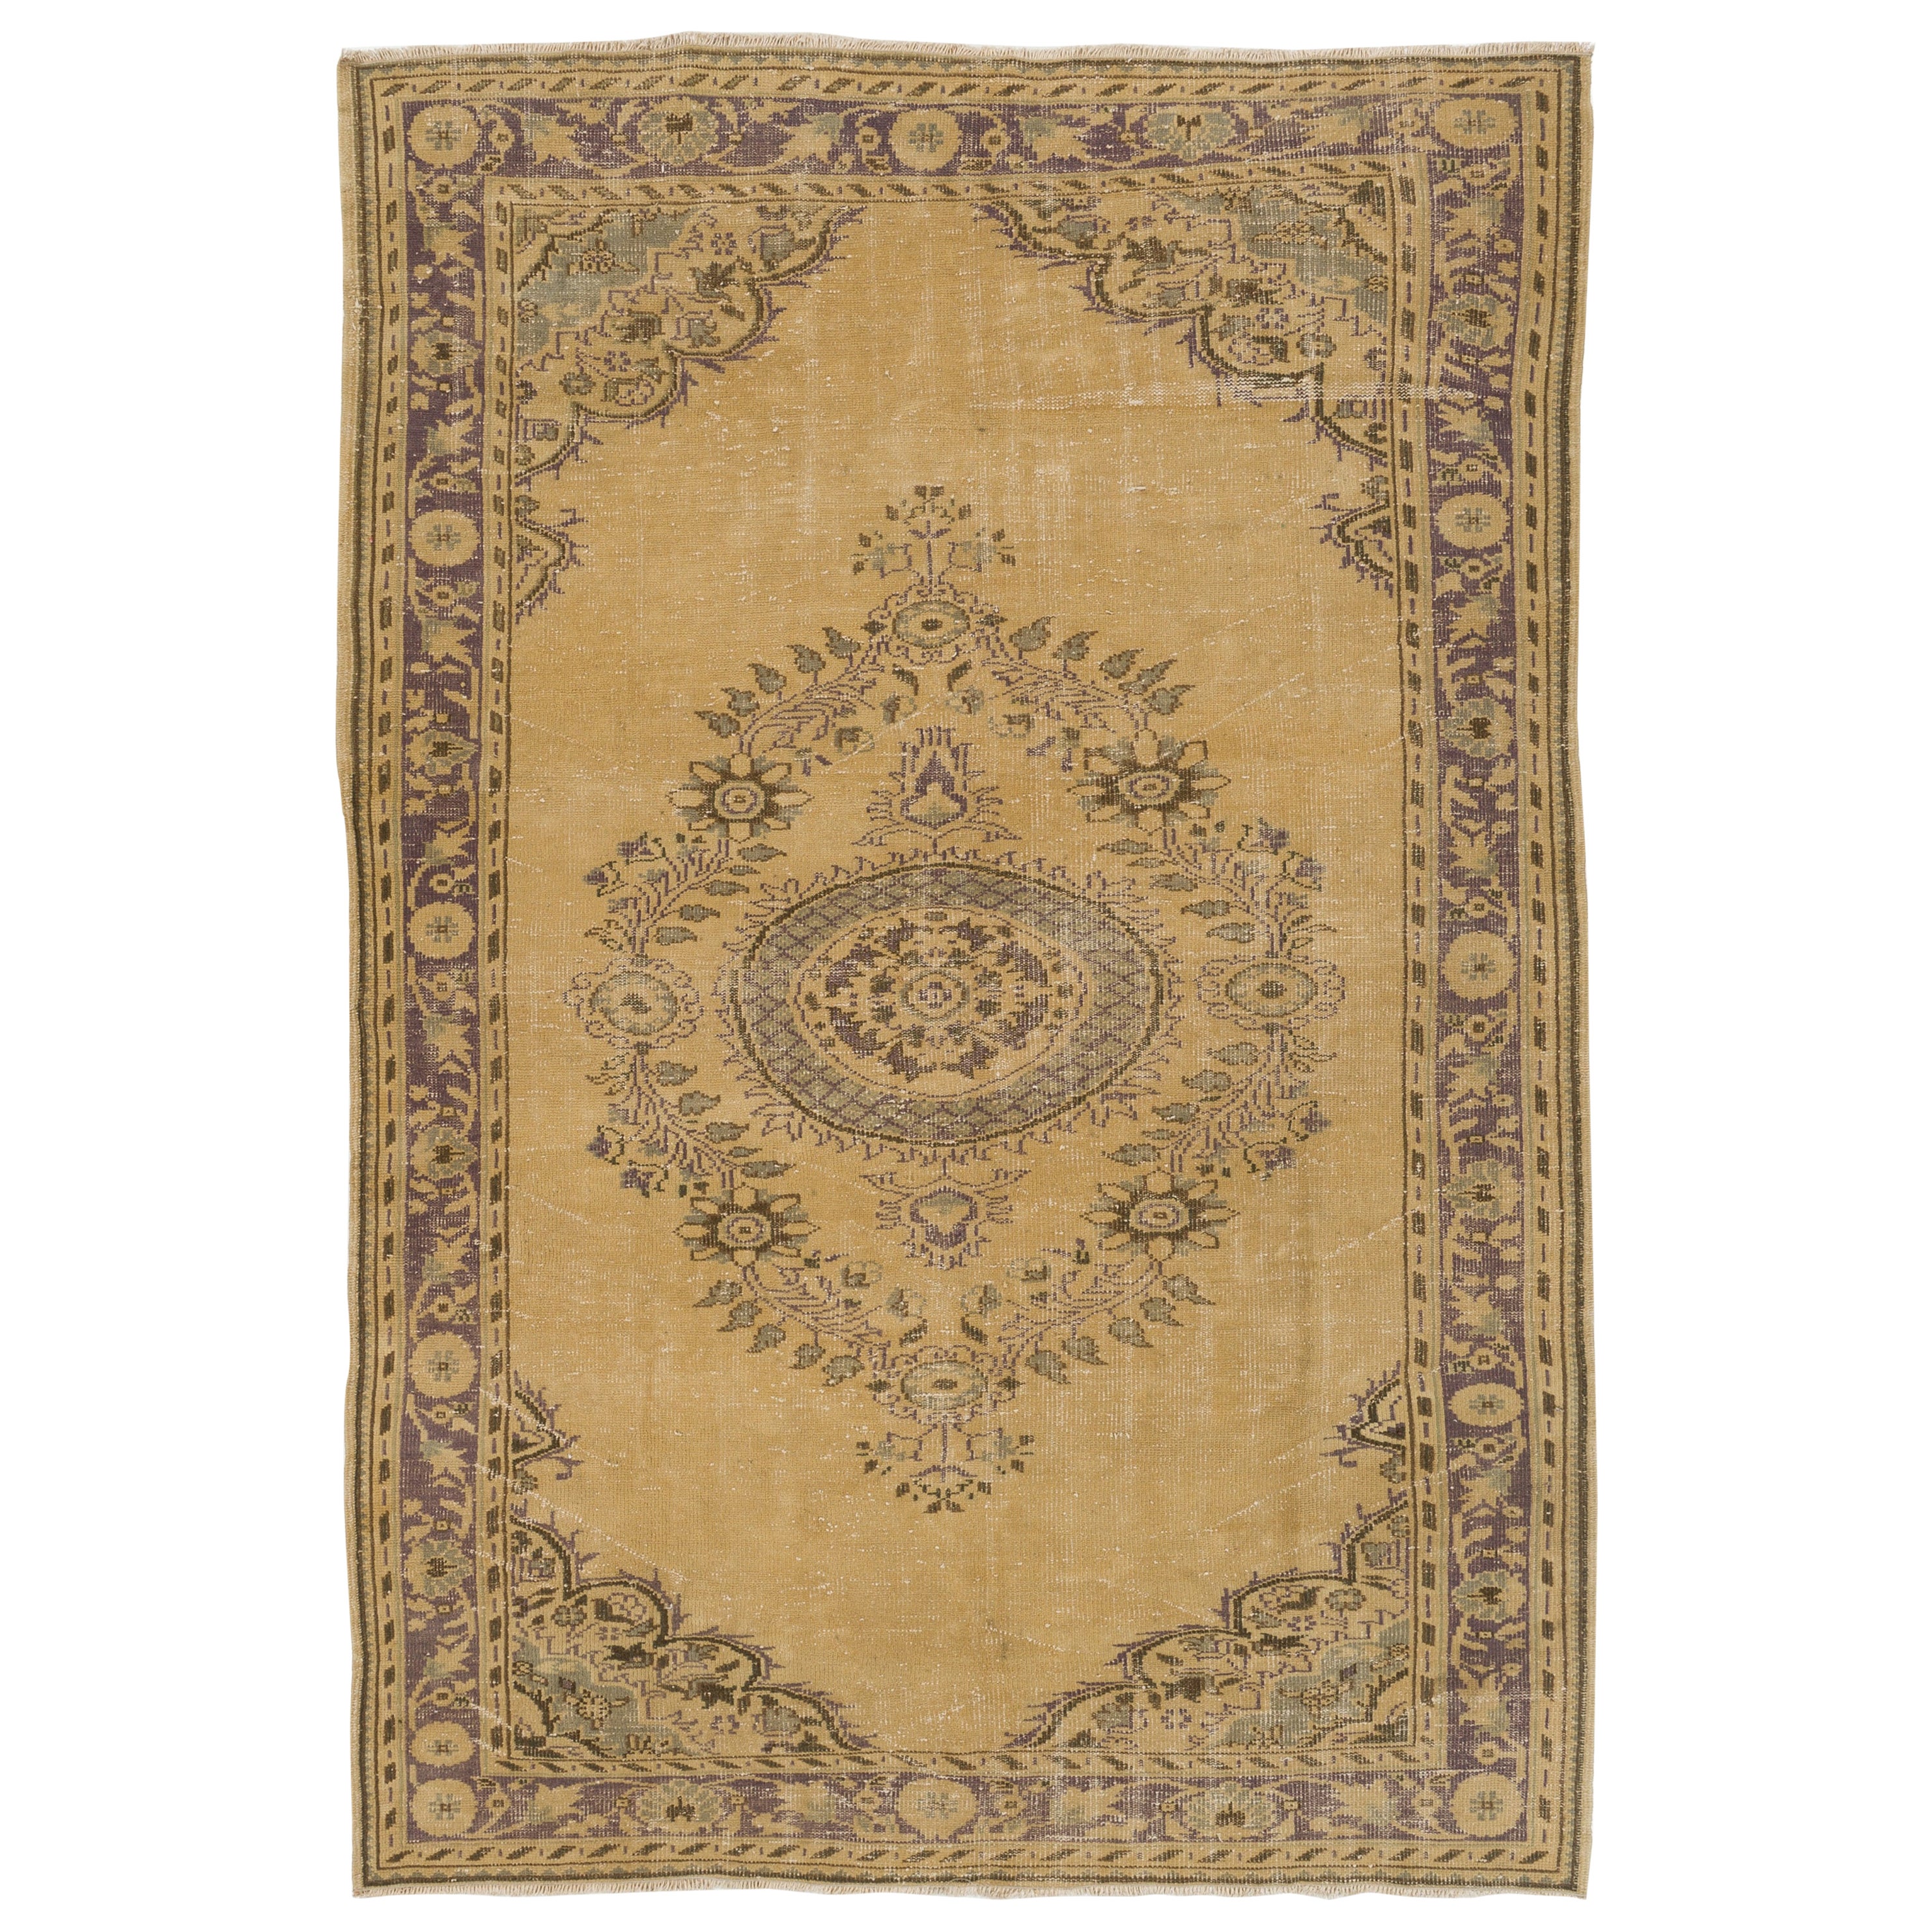 7x10 Ft Area Rug for Country Living Homes. Turkish Handmade Wool & Cotton Carpet